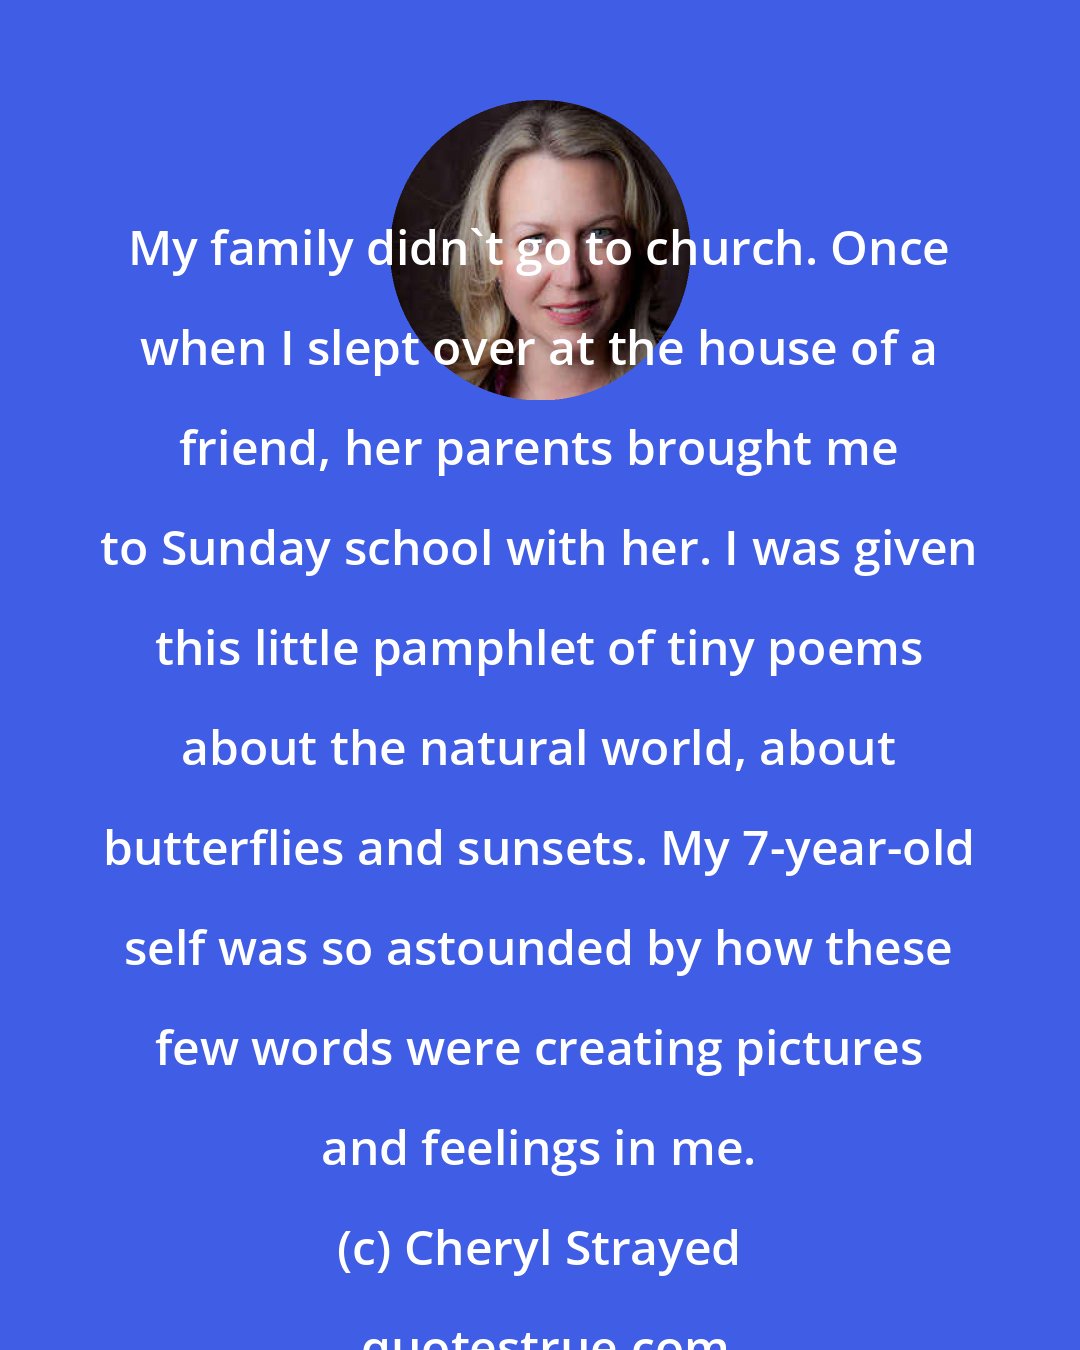 Cheryl Strayed: My family didn't go to church. Once when I slept over at the house of a friend, her parents brought me to Sunday school with her. I was given this little pamphlet of tiny poems about the natural world, about butterflies and sunsets. My 7-year-old self was so astounded by how these few words were creating pictures and feelings in me.